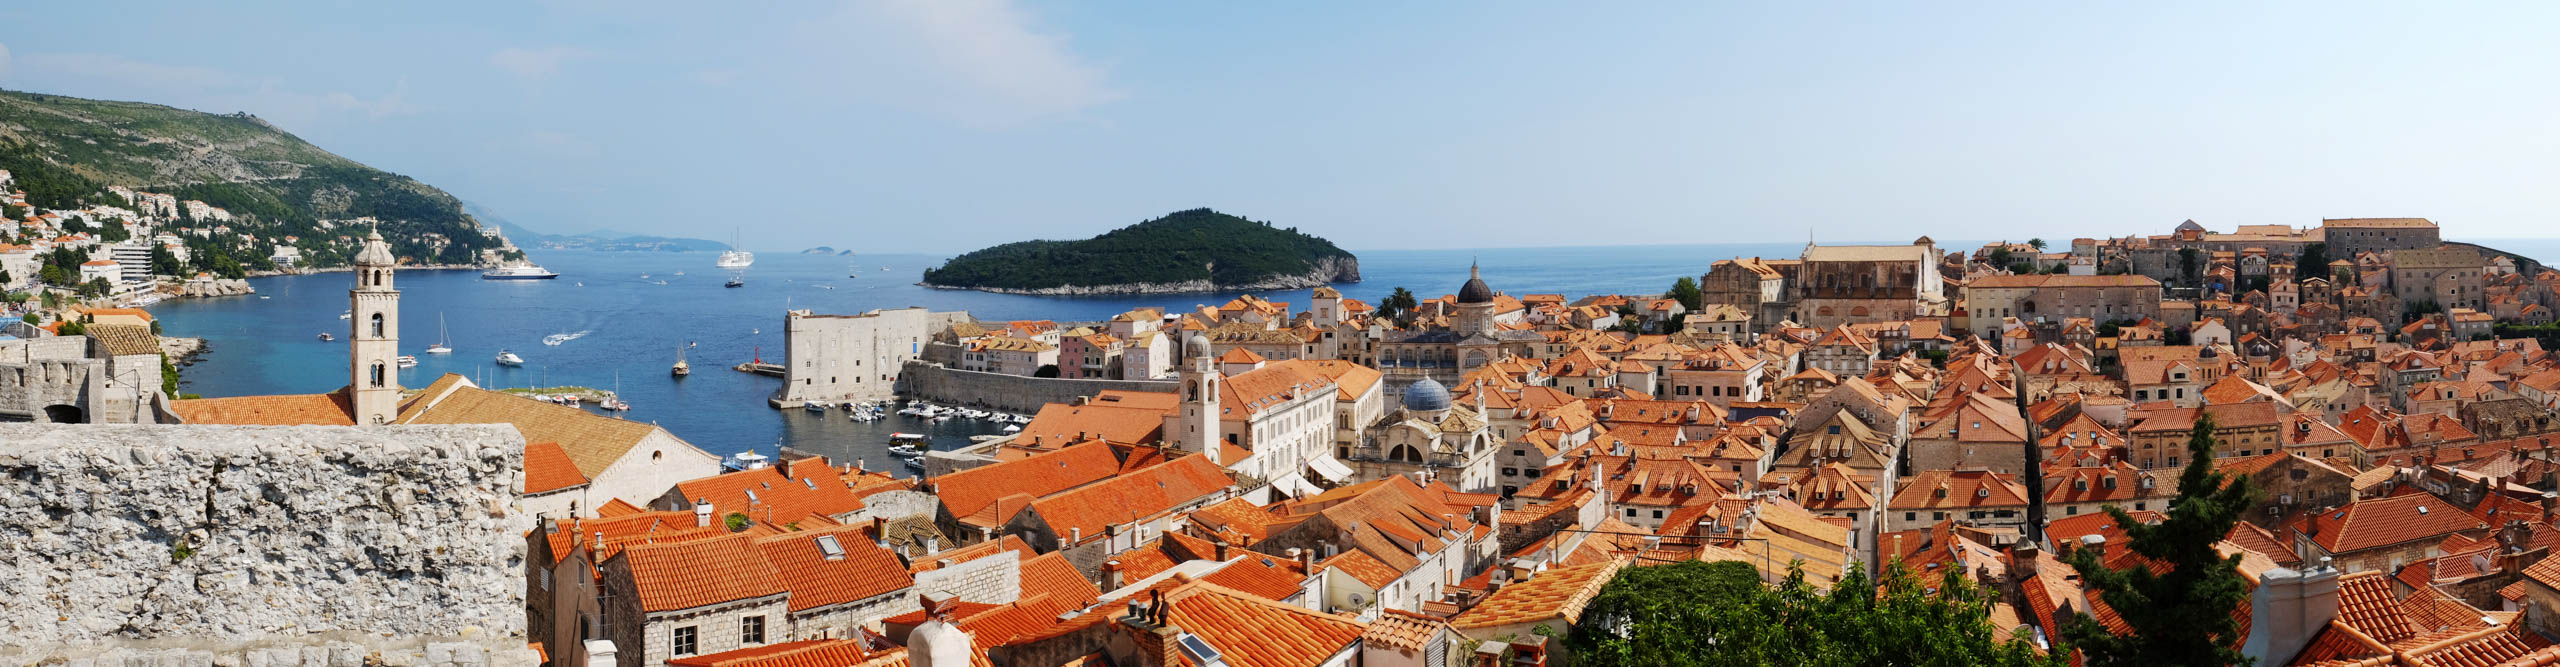 View of Dubrovnik, on a clear sunny day with the harbour in view, Dalmatia, Croatia